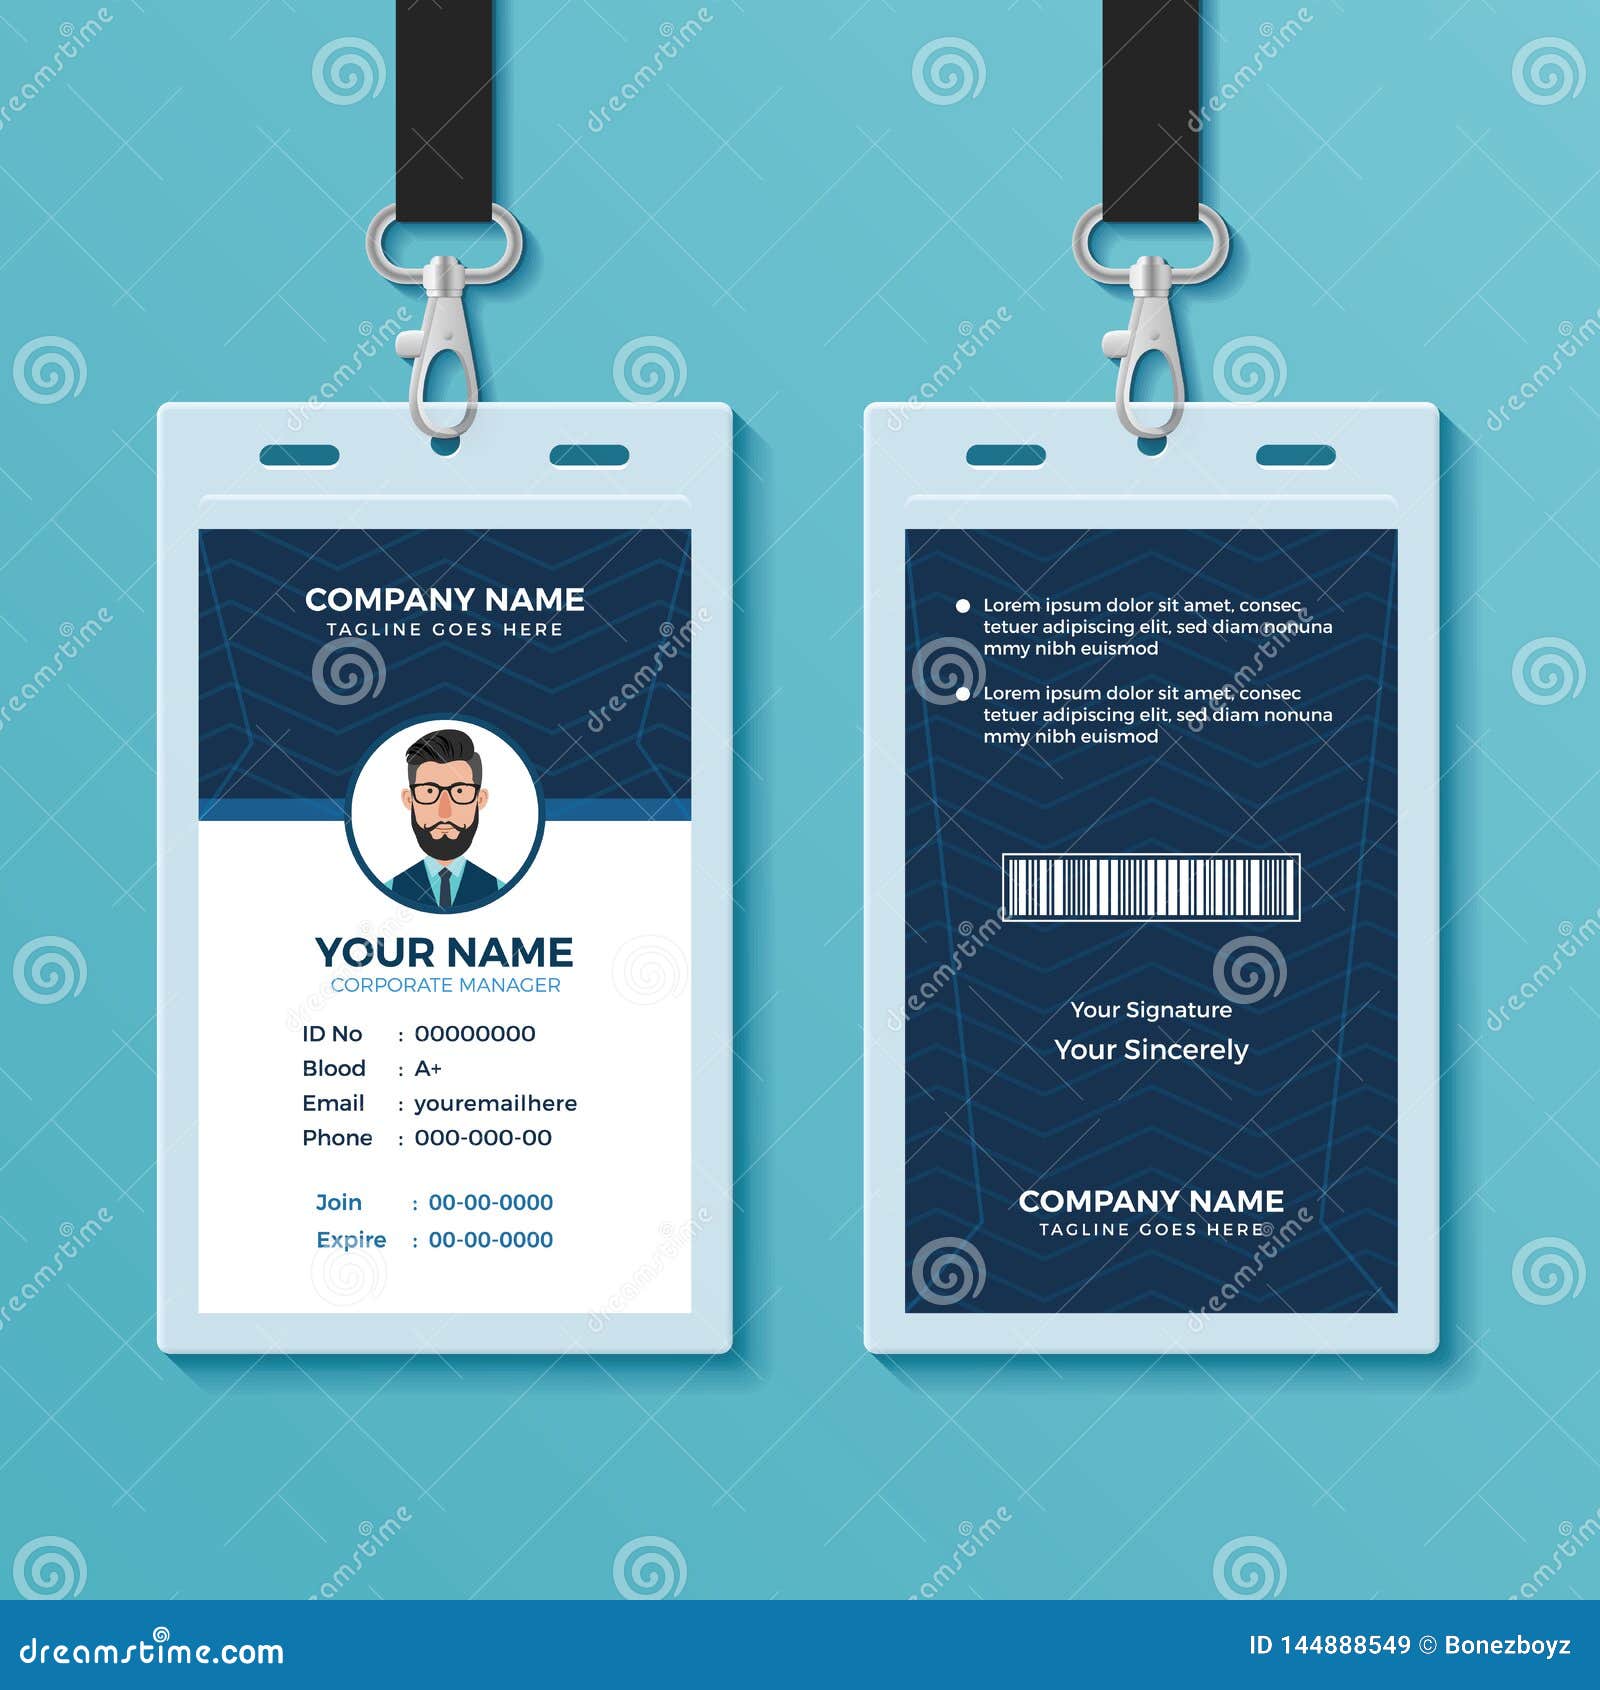 Modern And Clean Id Card Design Template Stock Vector Illustration Of Identity Agency 144888549